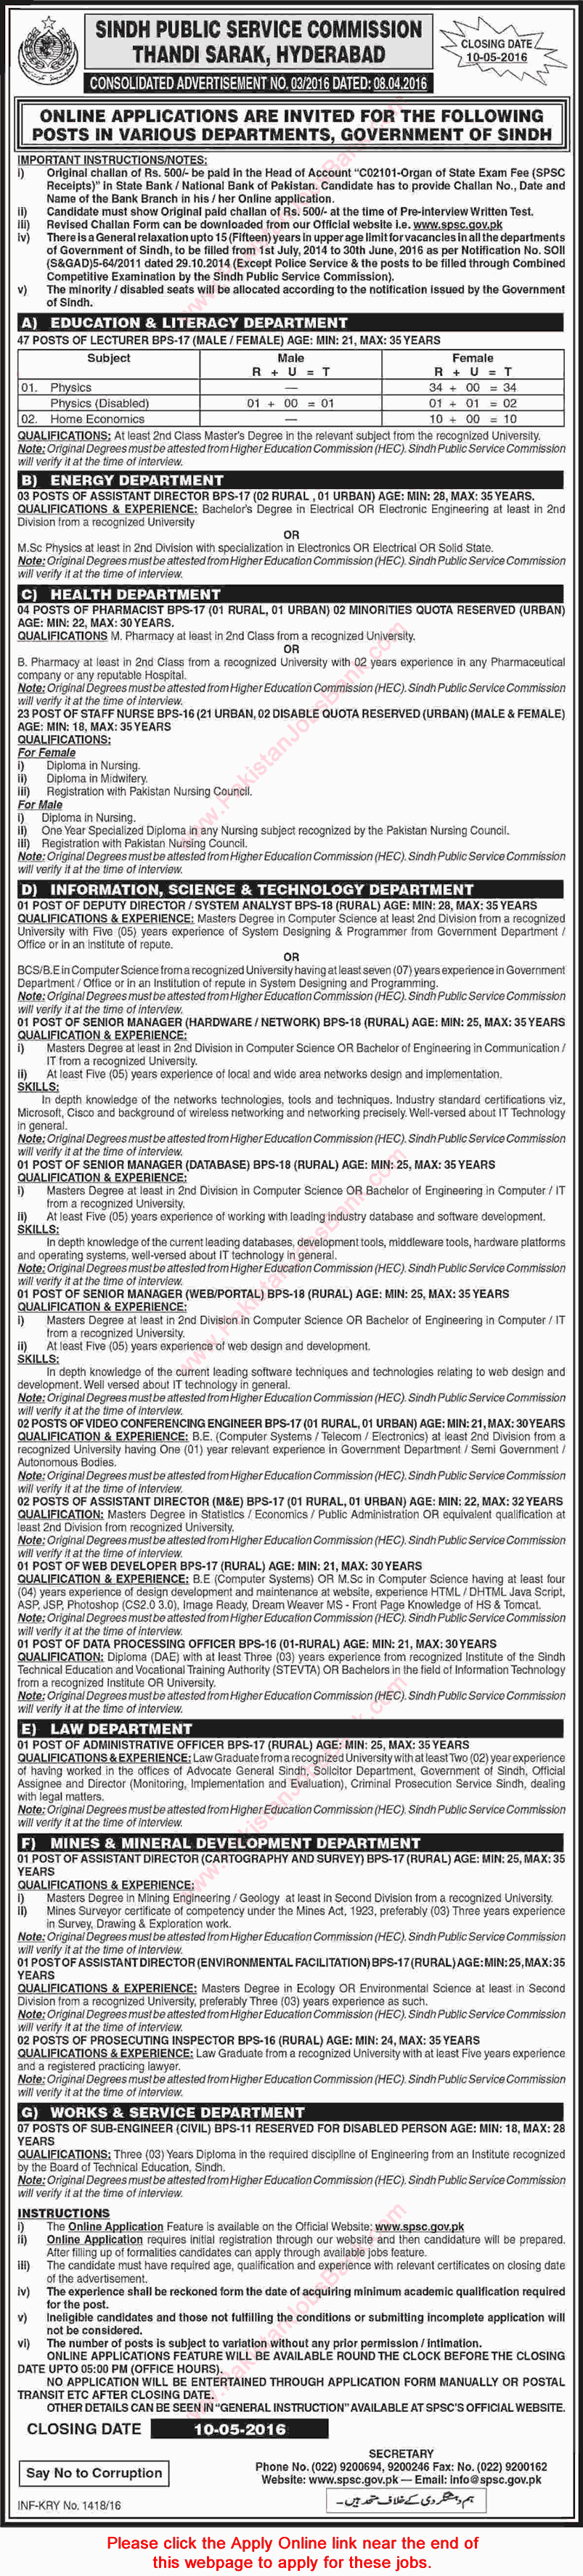 SPSC Jobs April 2016 Apply Online Consolidated Advertisement No. 03/2016 3/2016 Latest